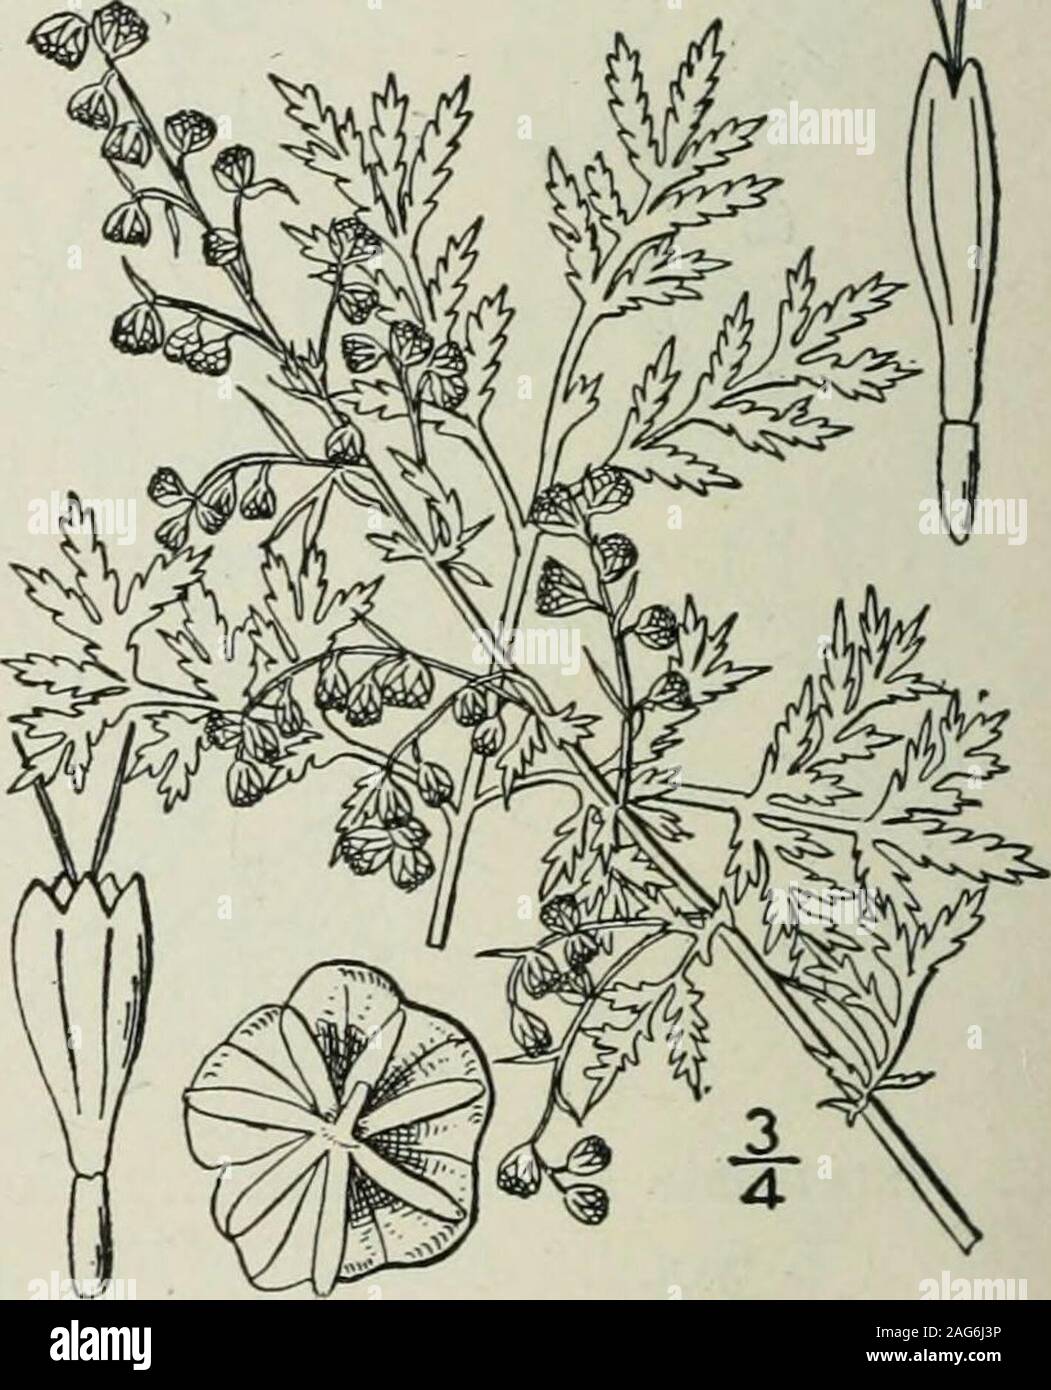 . An illustrated flora of the northern United States, Canada and the British possessions : from Newfoundland to the parallel of the southern boundary of Virginia and from the Atlantic Ocean westward to the 102nd meridian. II. Artemisia biennis Willd. Biennial Worm-wood. Fig. 4581. Artemisia biennis Willd. Phytogr. ii. 1794. Annual or biennial, glabrous throughout; stem veryleafy, usually branched, i°-4° high, the branches nearlyerect. Leaves i-3 long, 1-2-pinnately divided intolinear or linear-oblong, acutish, serrate or incisedlobes, the lowest petioled, the uppermost less dividedor rarely qu Stock Photo